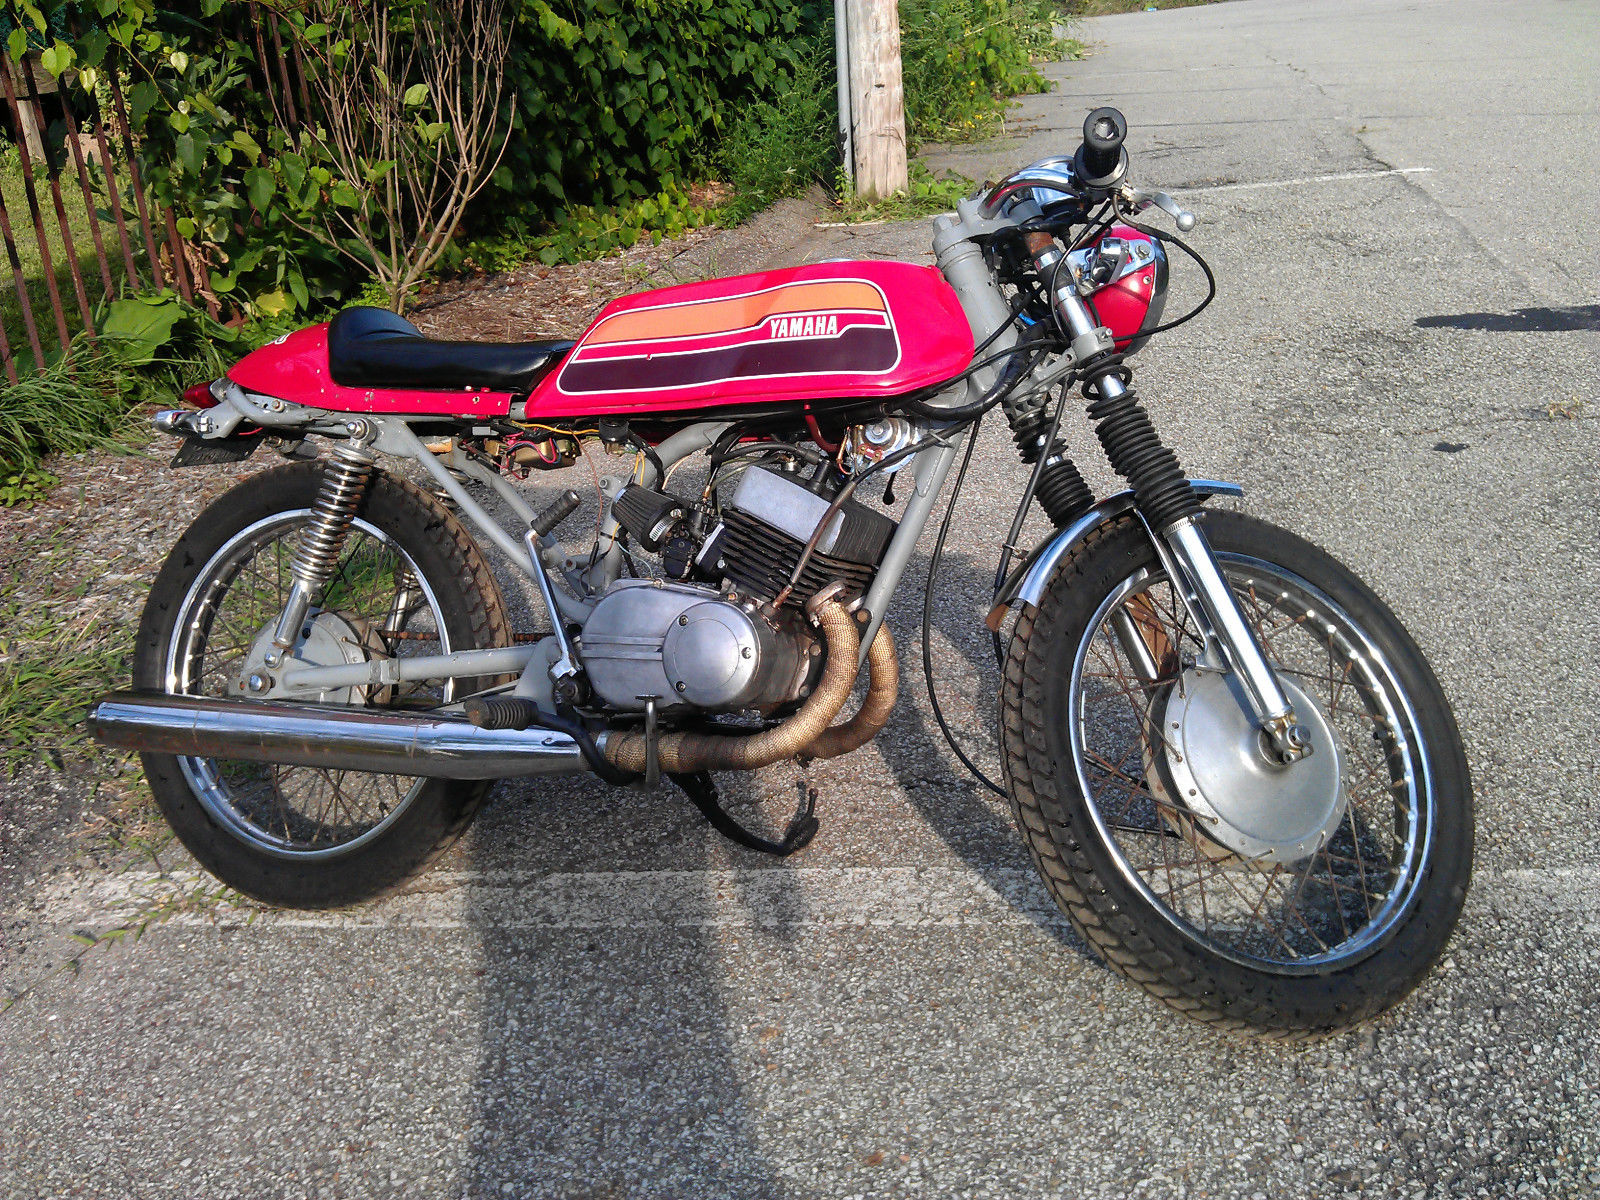 1974 Yamaha RD 200 Two Stroke Cafe Racer